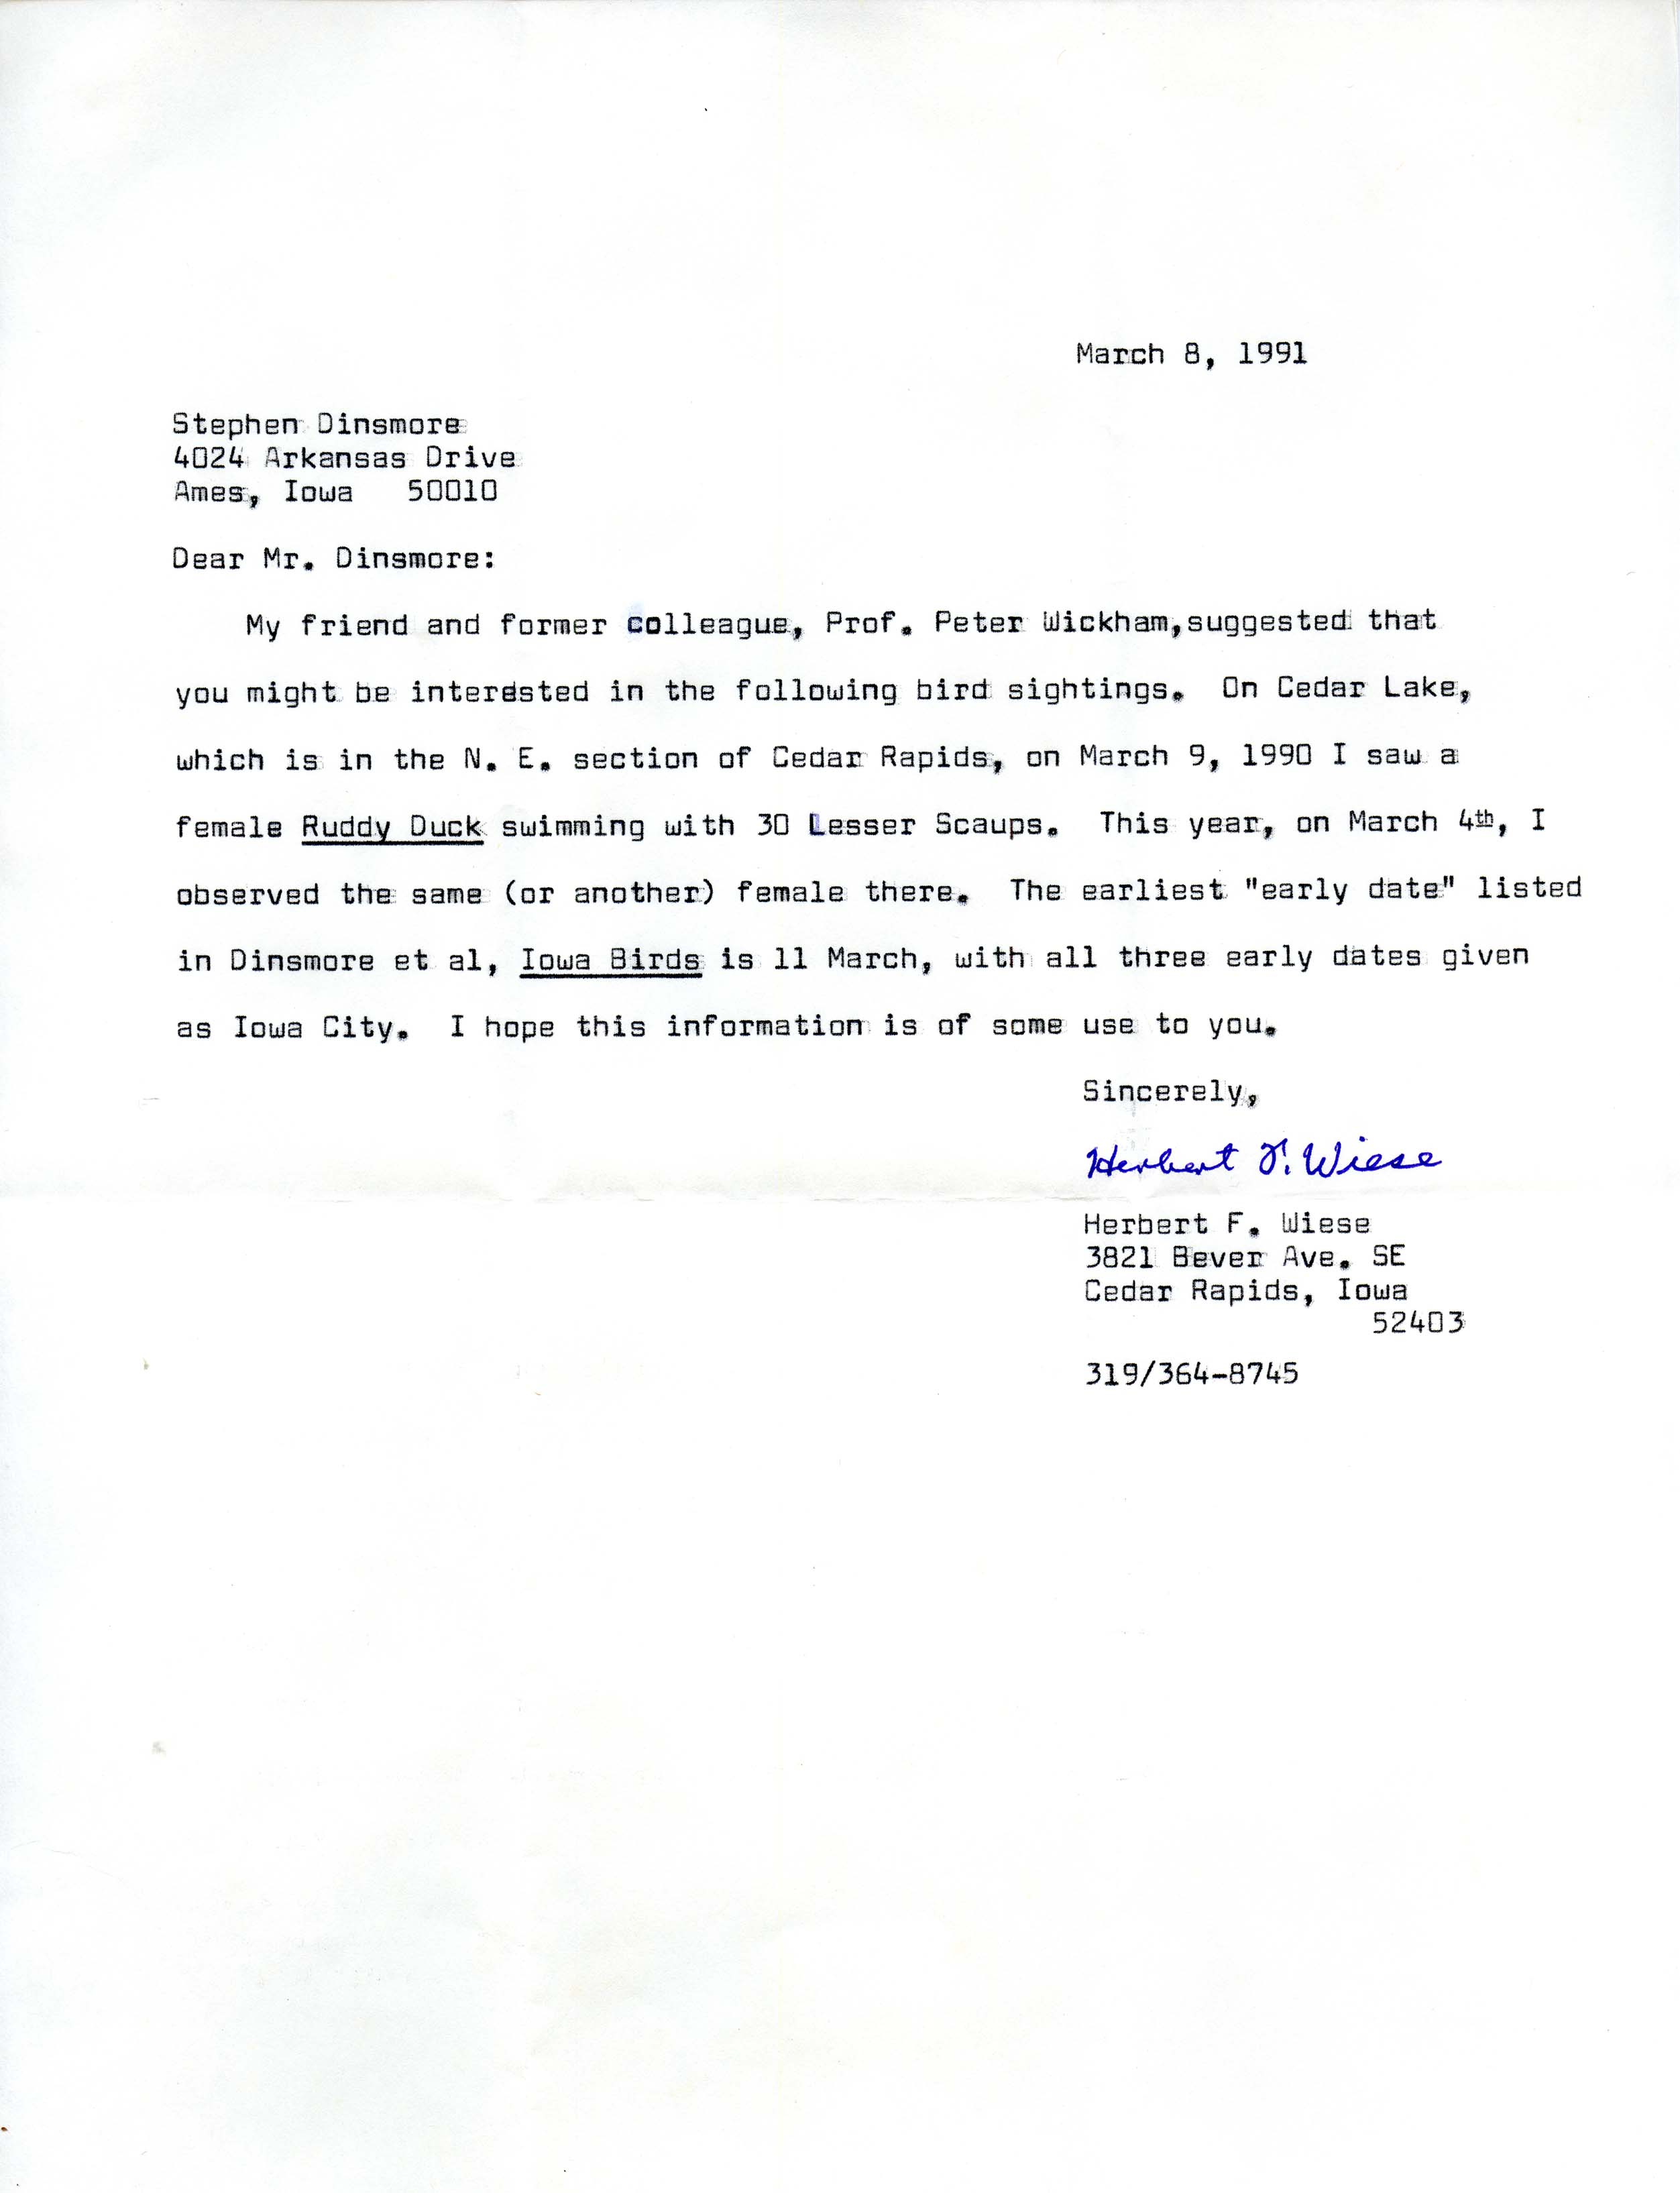 Herbert F. Wiese letter to Stephen Dinsmore regarding bird sightings for IOU quarterly field reports spring 1991, March 12, 1991